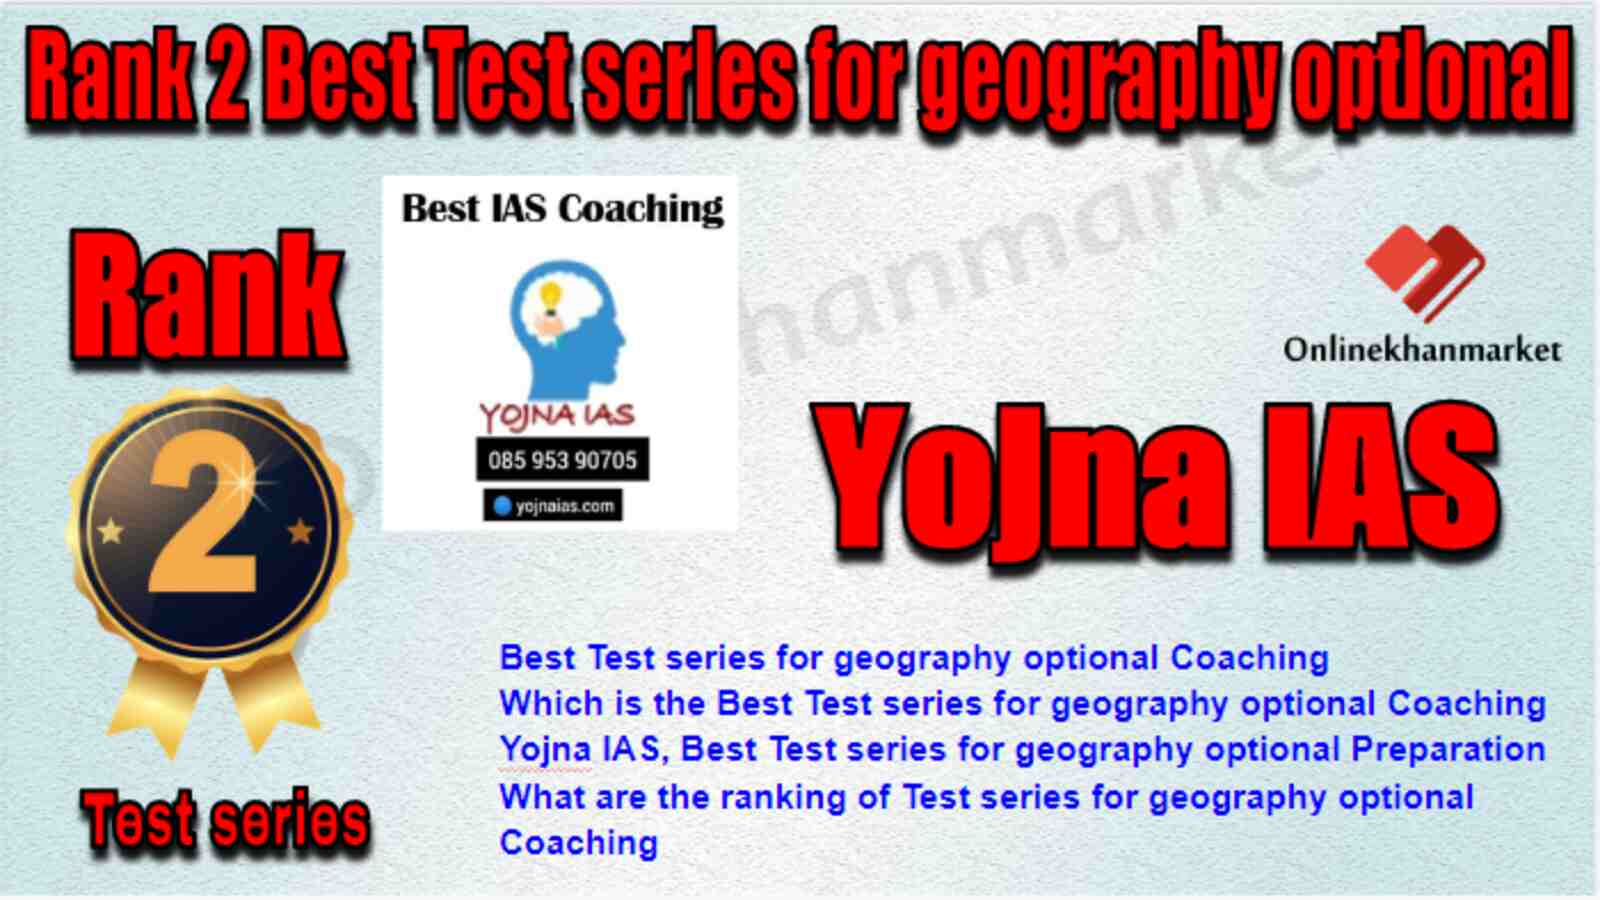 Rank 2 Best Test series for geography optional